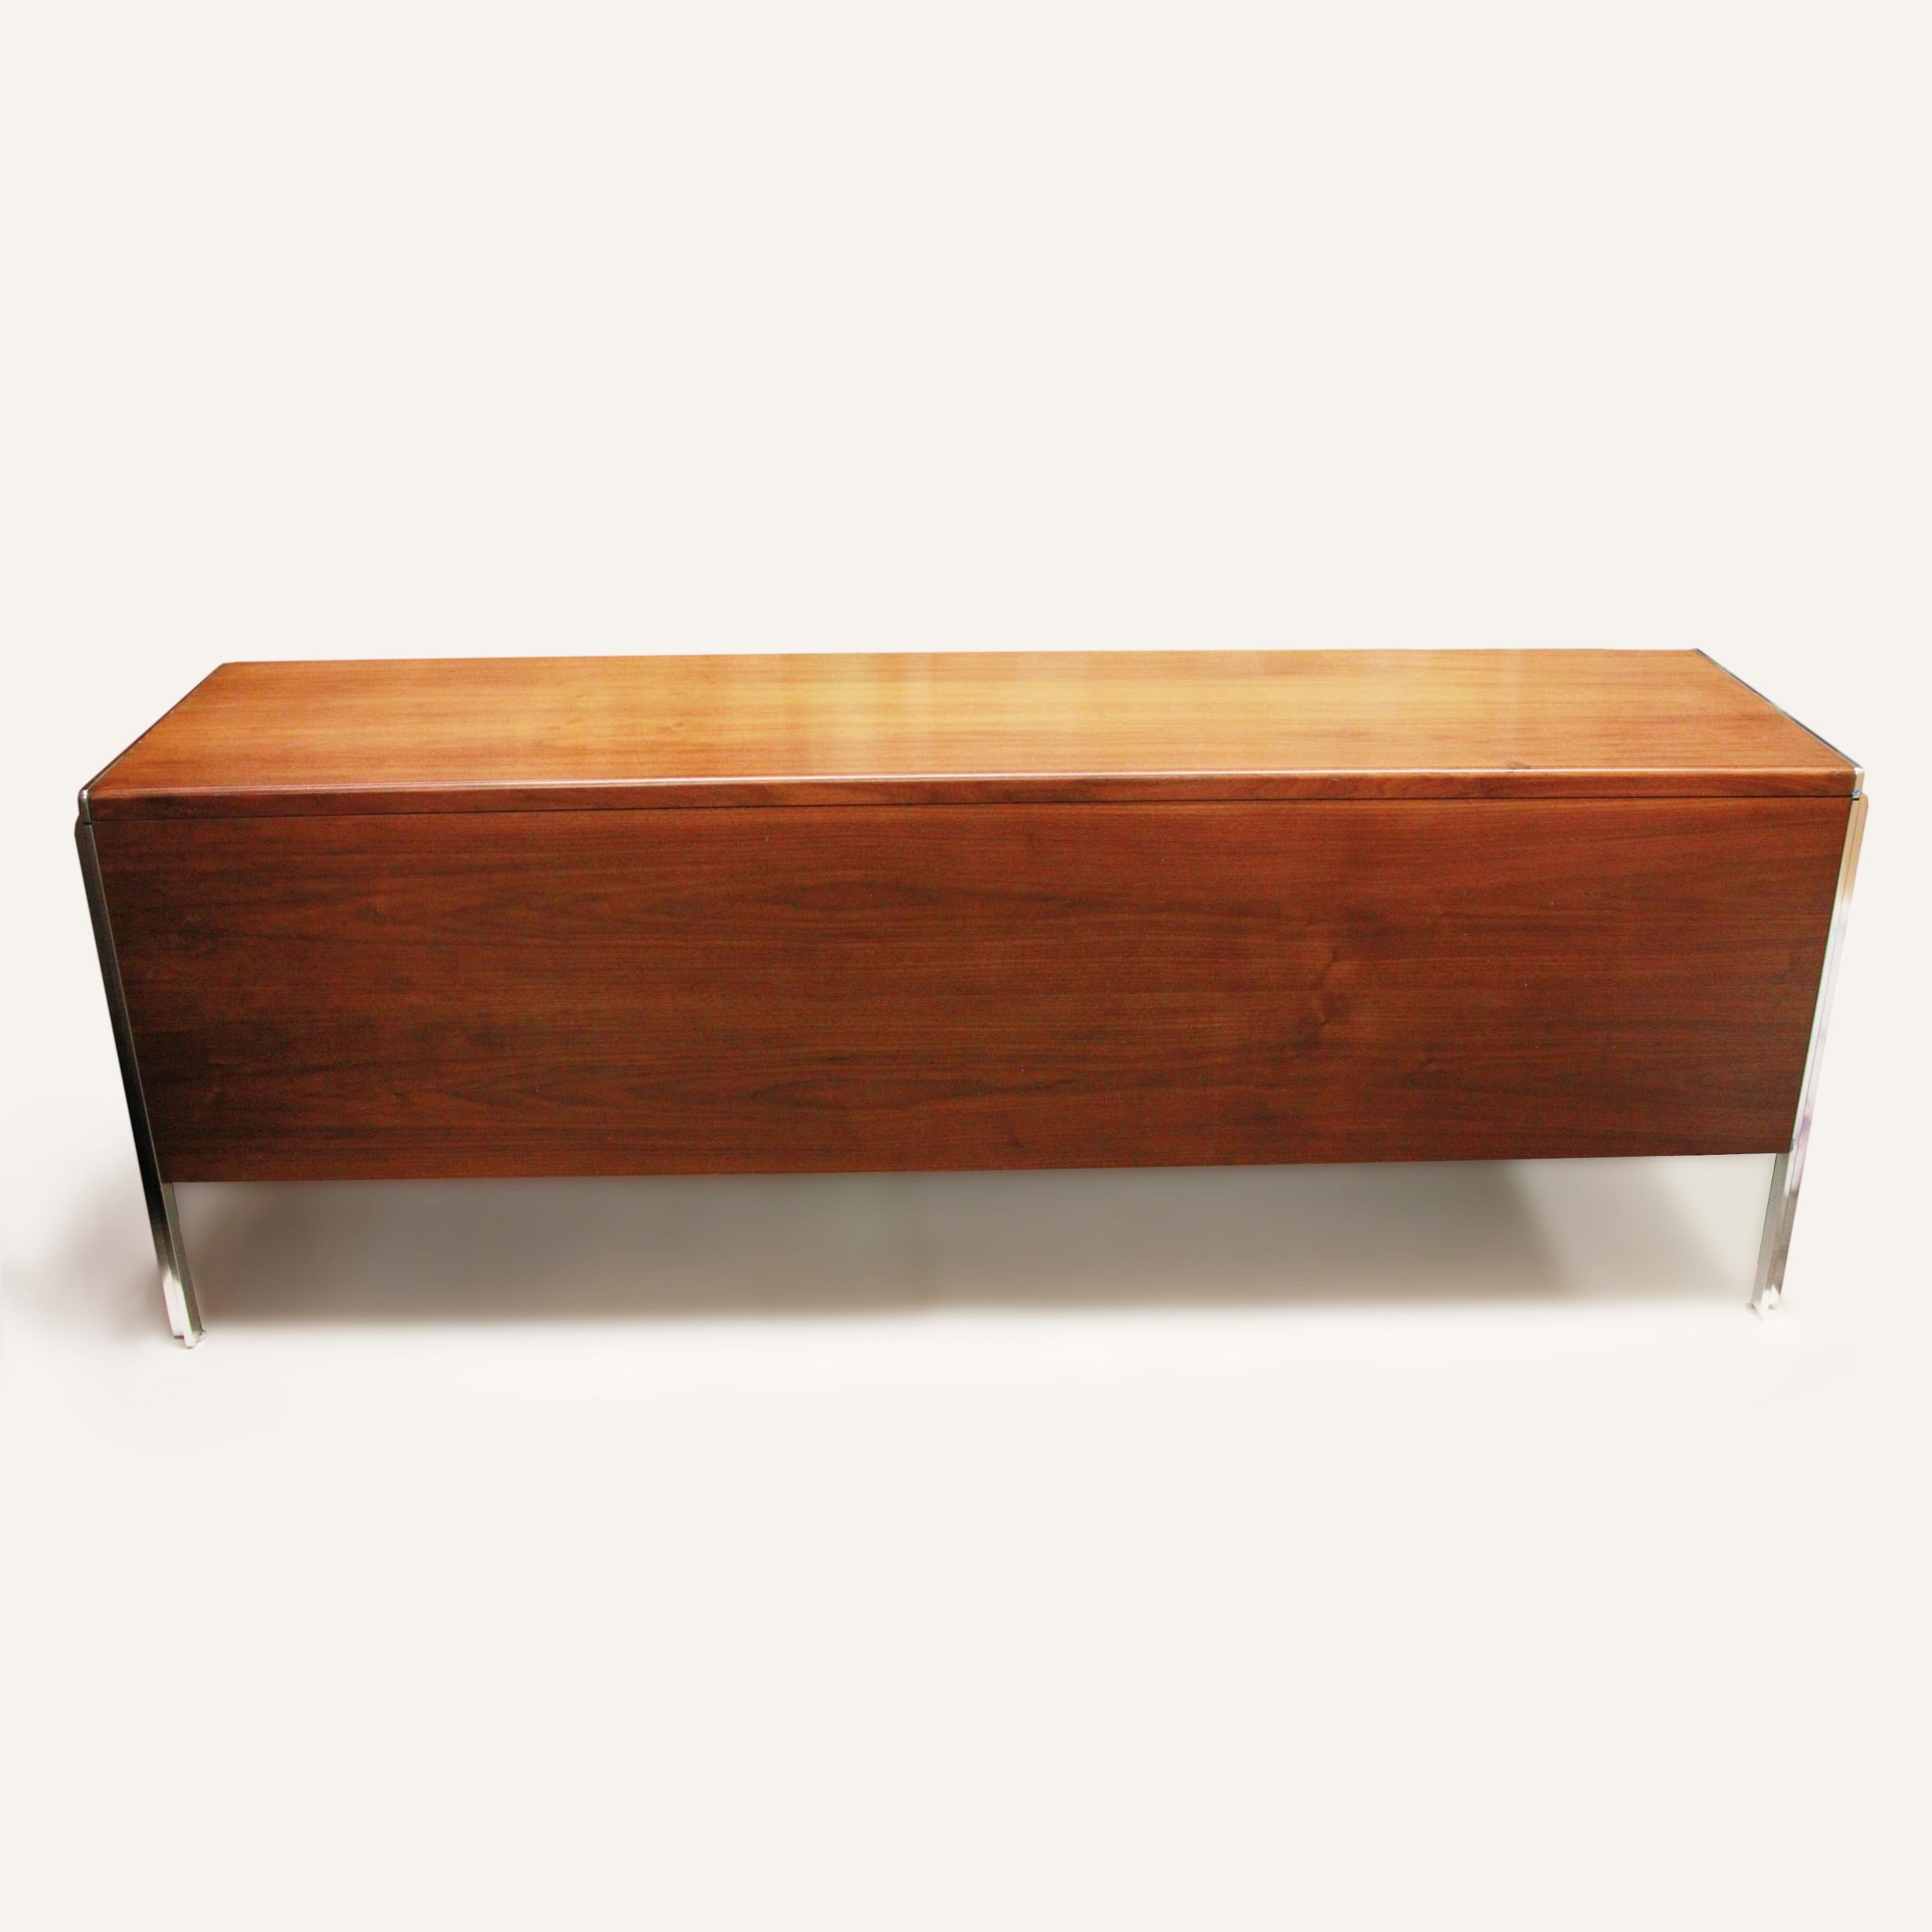 Mid-Century Modern Walnut & Chrome Credenza by Alexis Yermakov for Stow Davis In Good Condition For Sale In Lafayette, IN